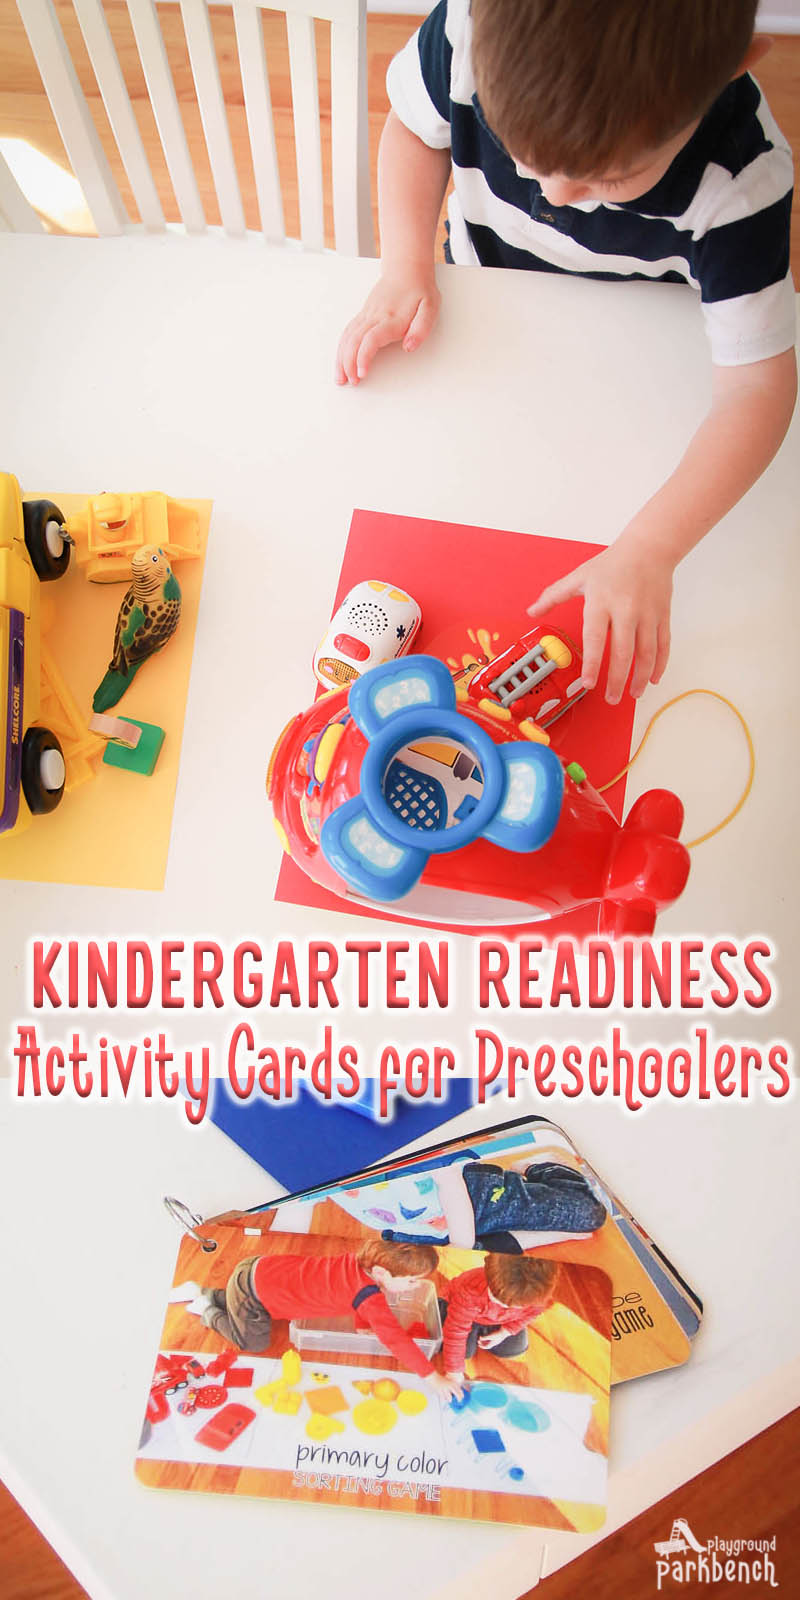 Want to prepare your preschooler for kindergarten (and bonus - drink your coffee hot every morning)? These Breakfast Invitation Activity Cards feature kindergarten readiness activities for kids. With simple set ups in seconds to minutes, your child will play to develop the skills they need for school readiness #preschool #kidsactivities